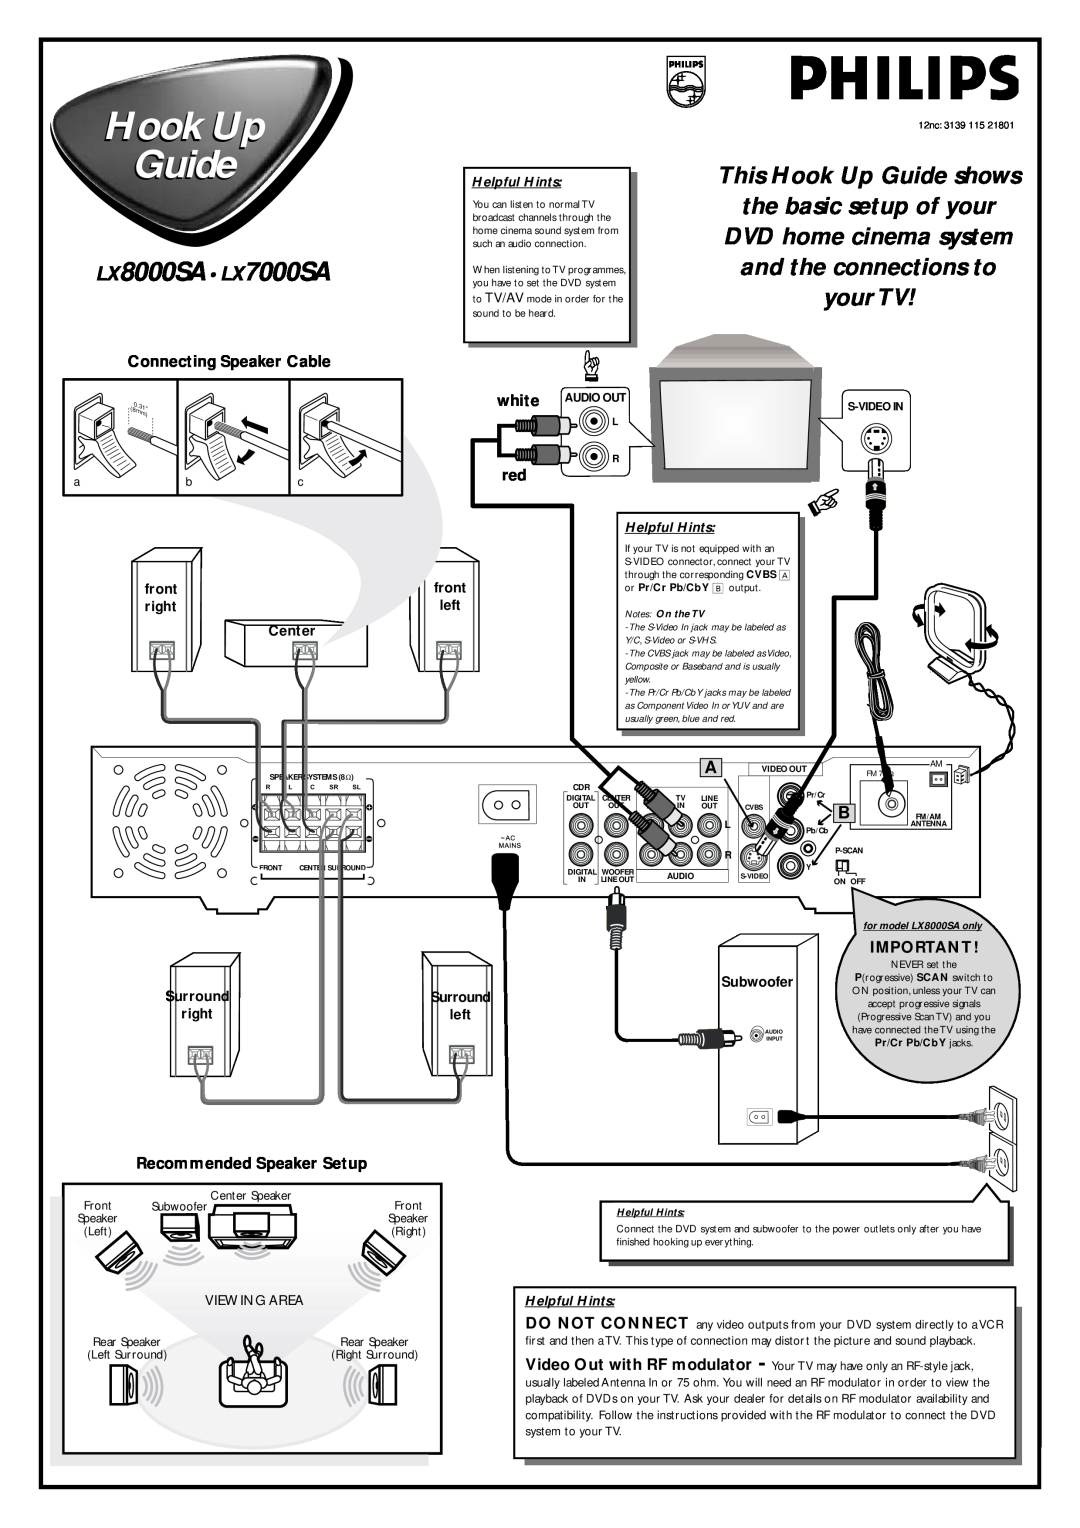 Philips LX8000SA LX7000SA, This Hook Up Guide shows the basic setup of your, your TV, Helpful Hints, Audio Out 